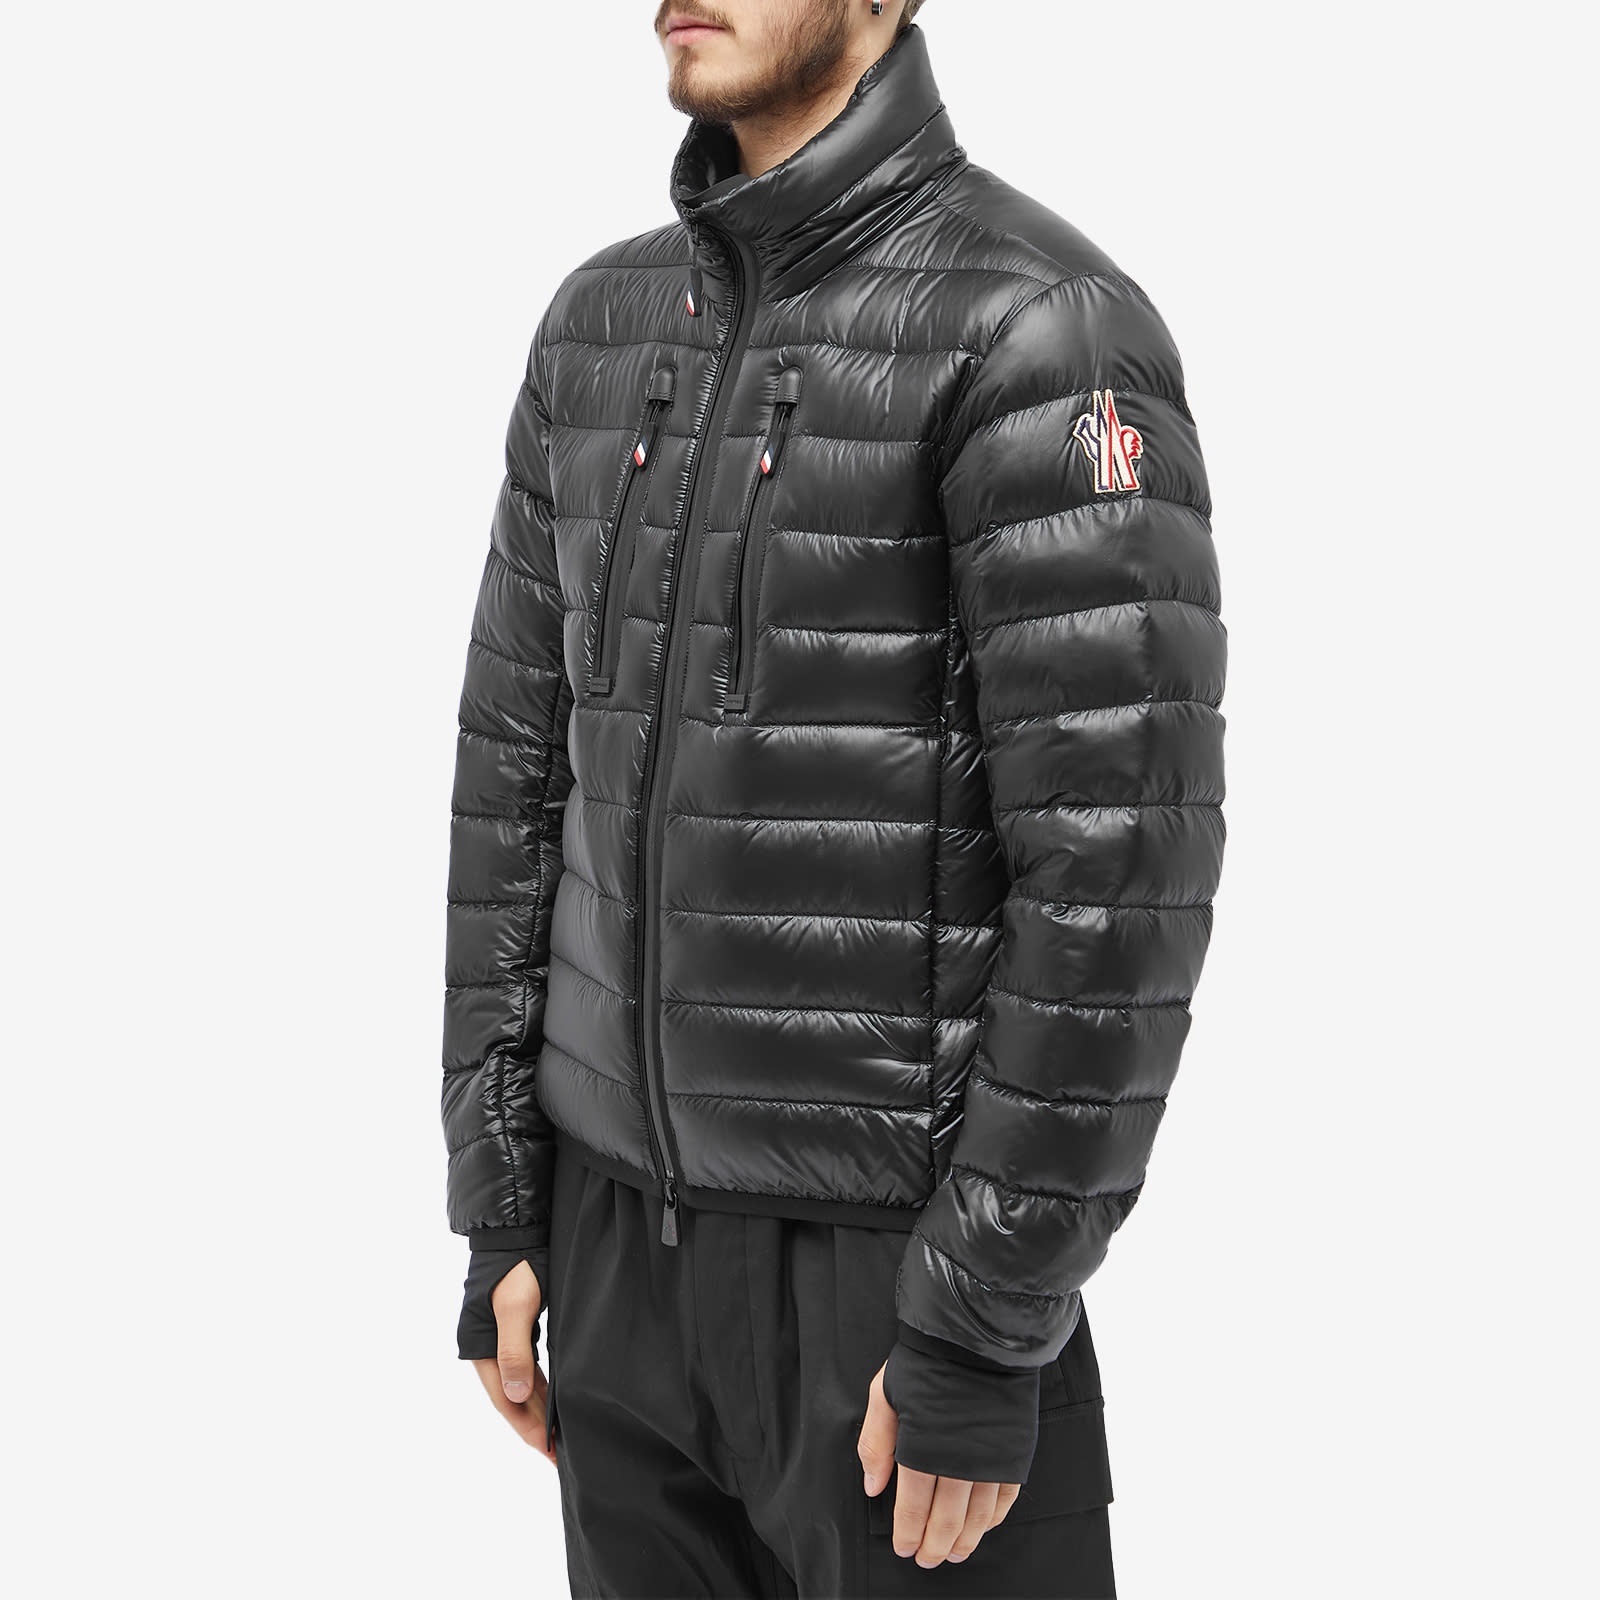 Moncler Grenoble Hers Micro Ripstop Jacket - 2